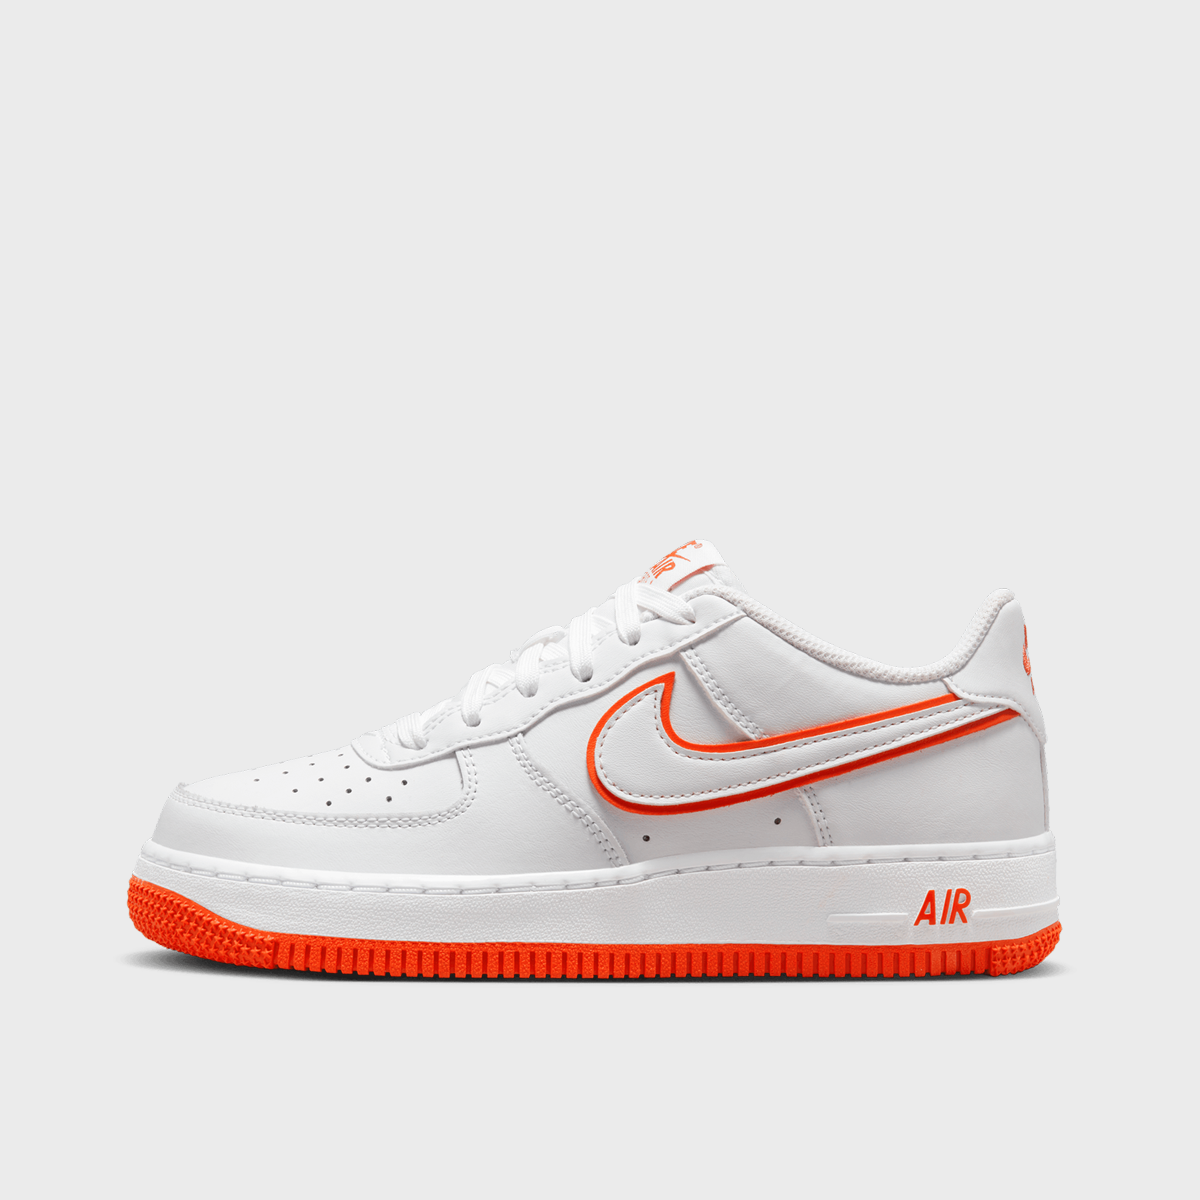 NIKE AIR FORCE 1 - Snipes